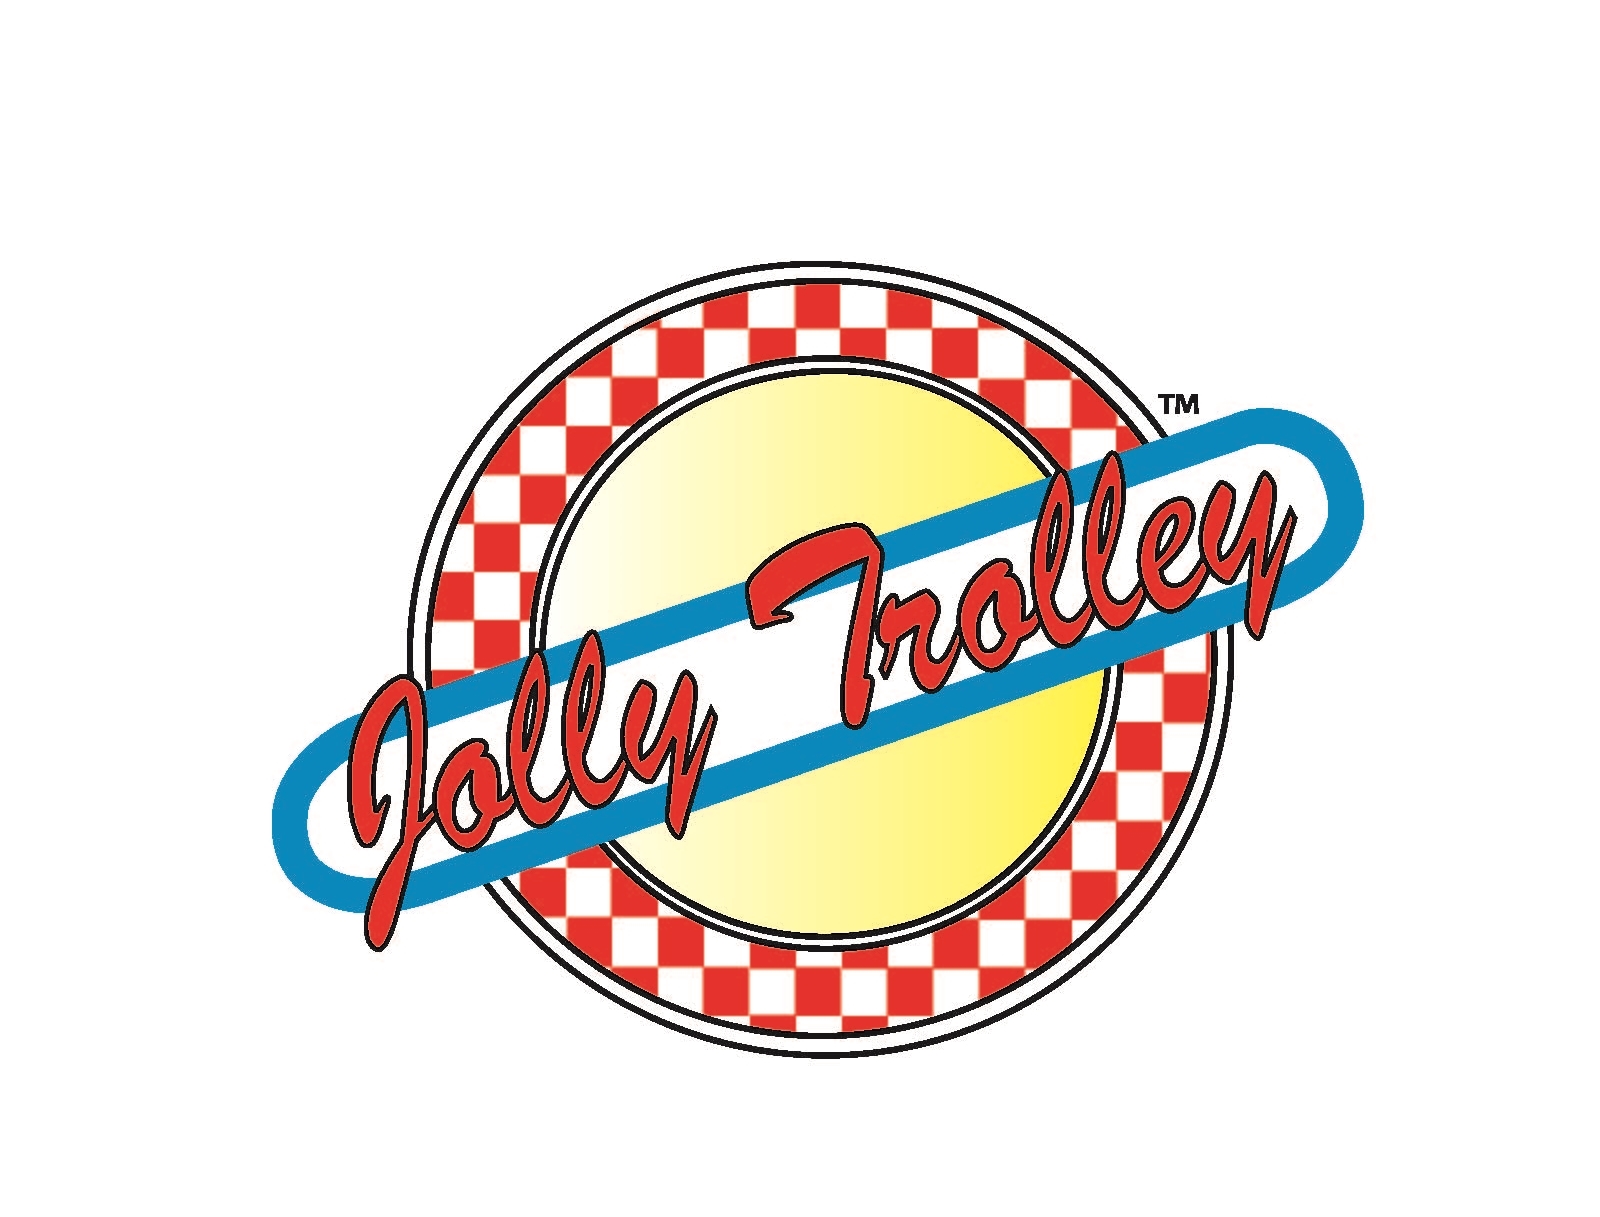 Jolly Trolley logo color with TM